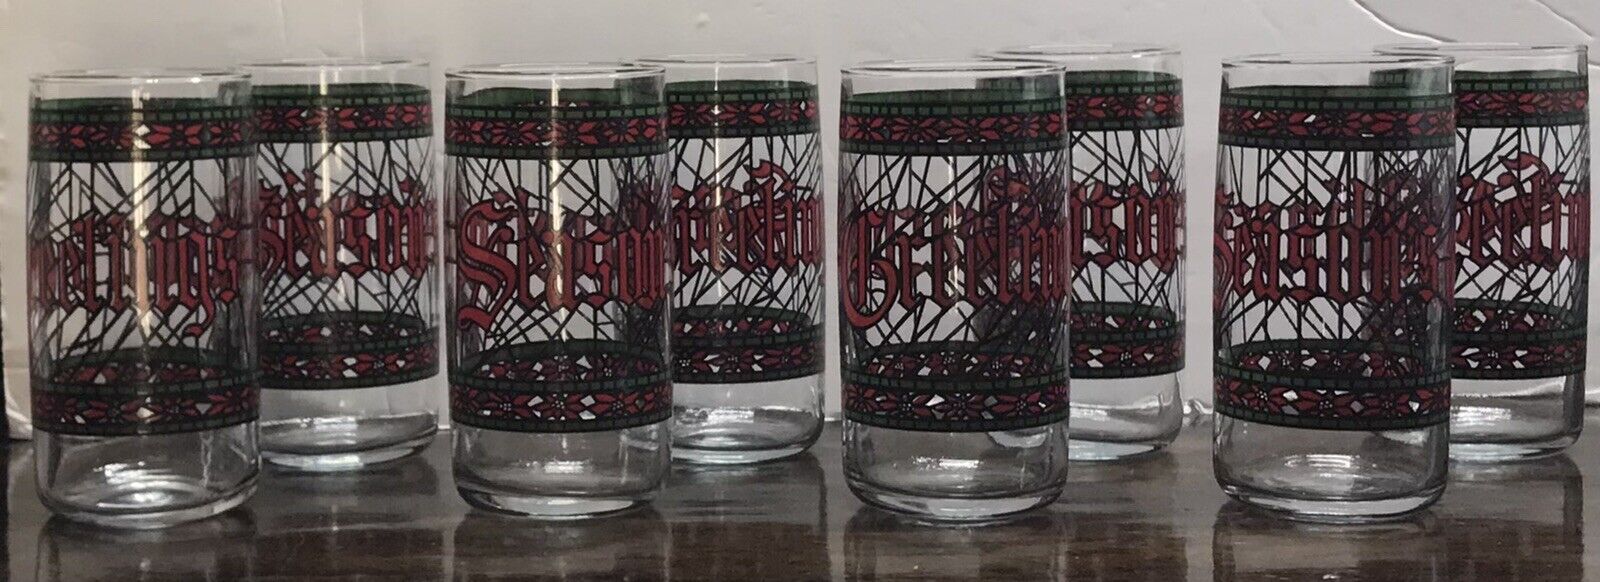 Lot of 8-Vintage Houze Season's Greetings Stained Glass 5” Christmas Tumblers